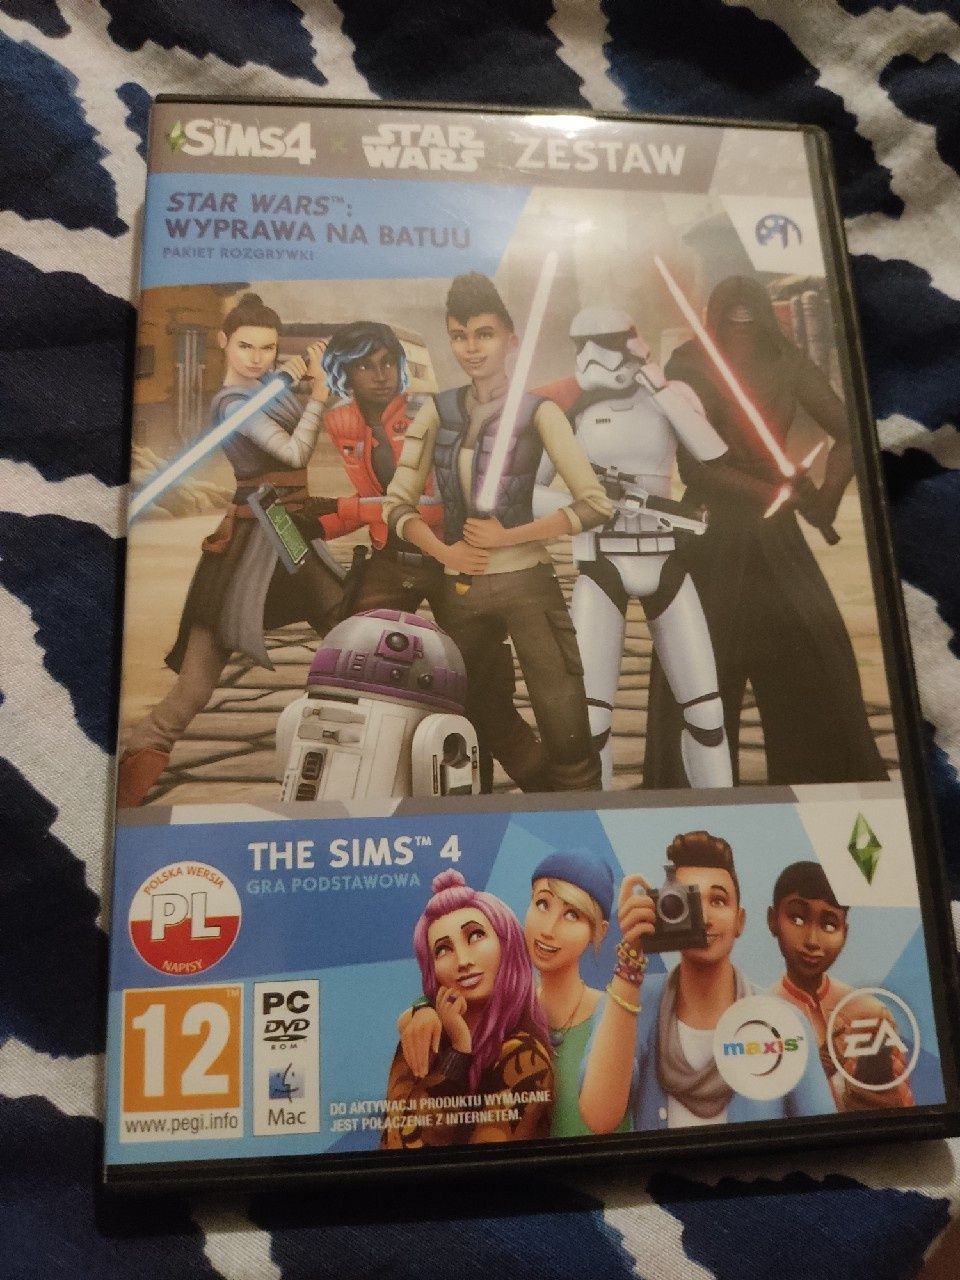 The Sims Star wars pc